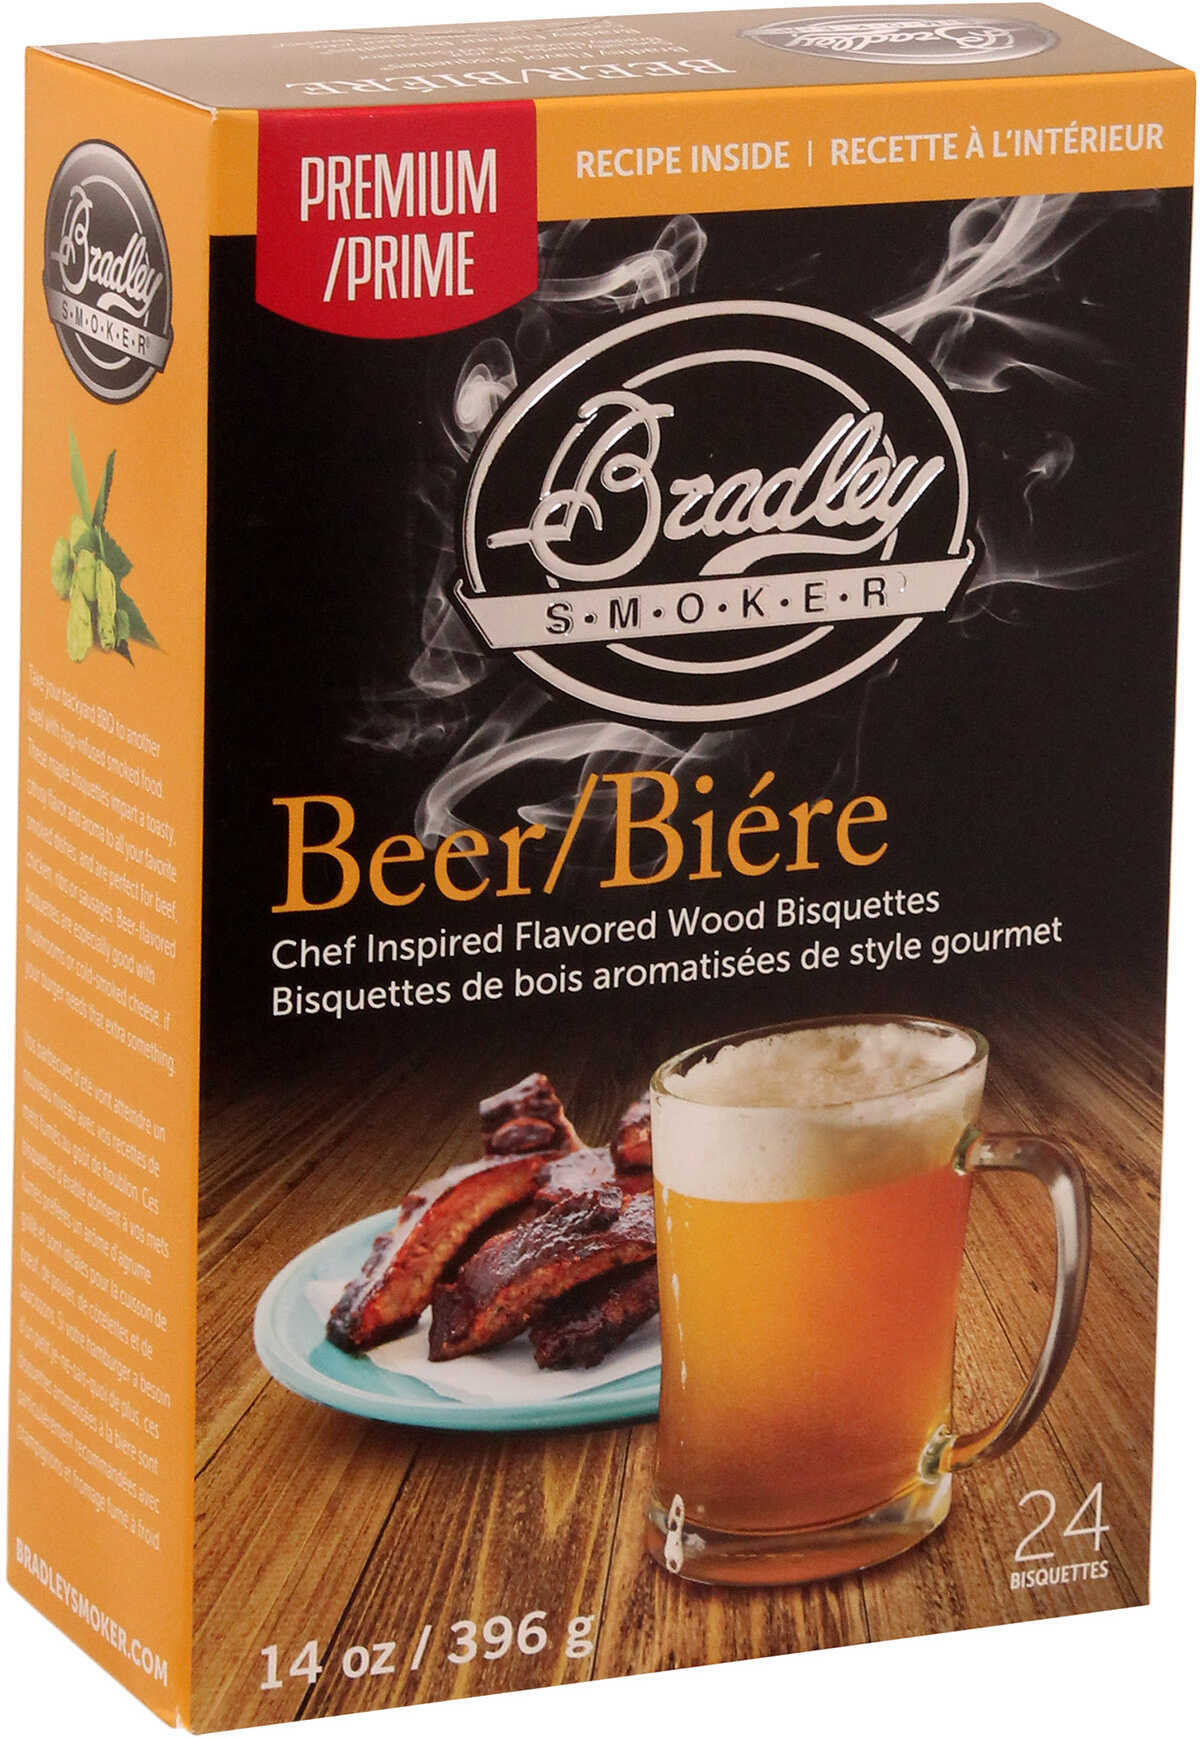 Bradley Technologies Smoker Beer BISQUETTES 24 Pack